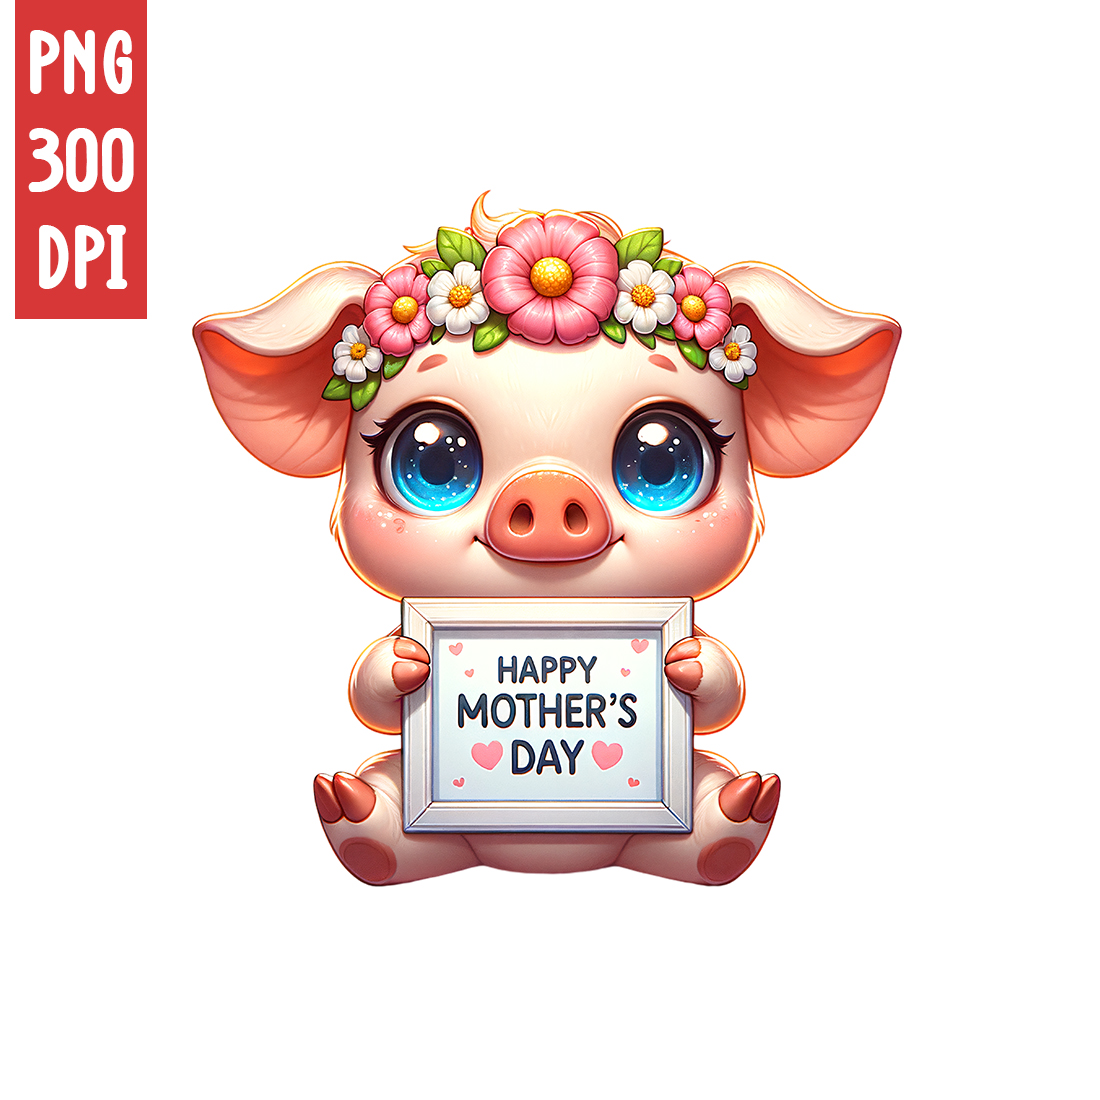 Mother's Day Animal Clipart | Cute Pig with frame clipart | PNG cover image.